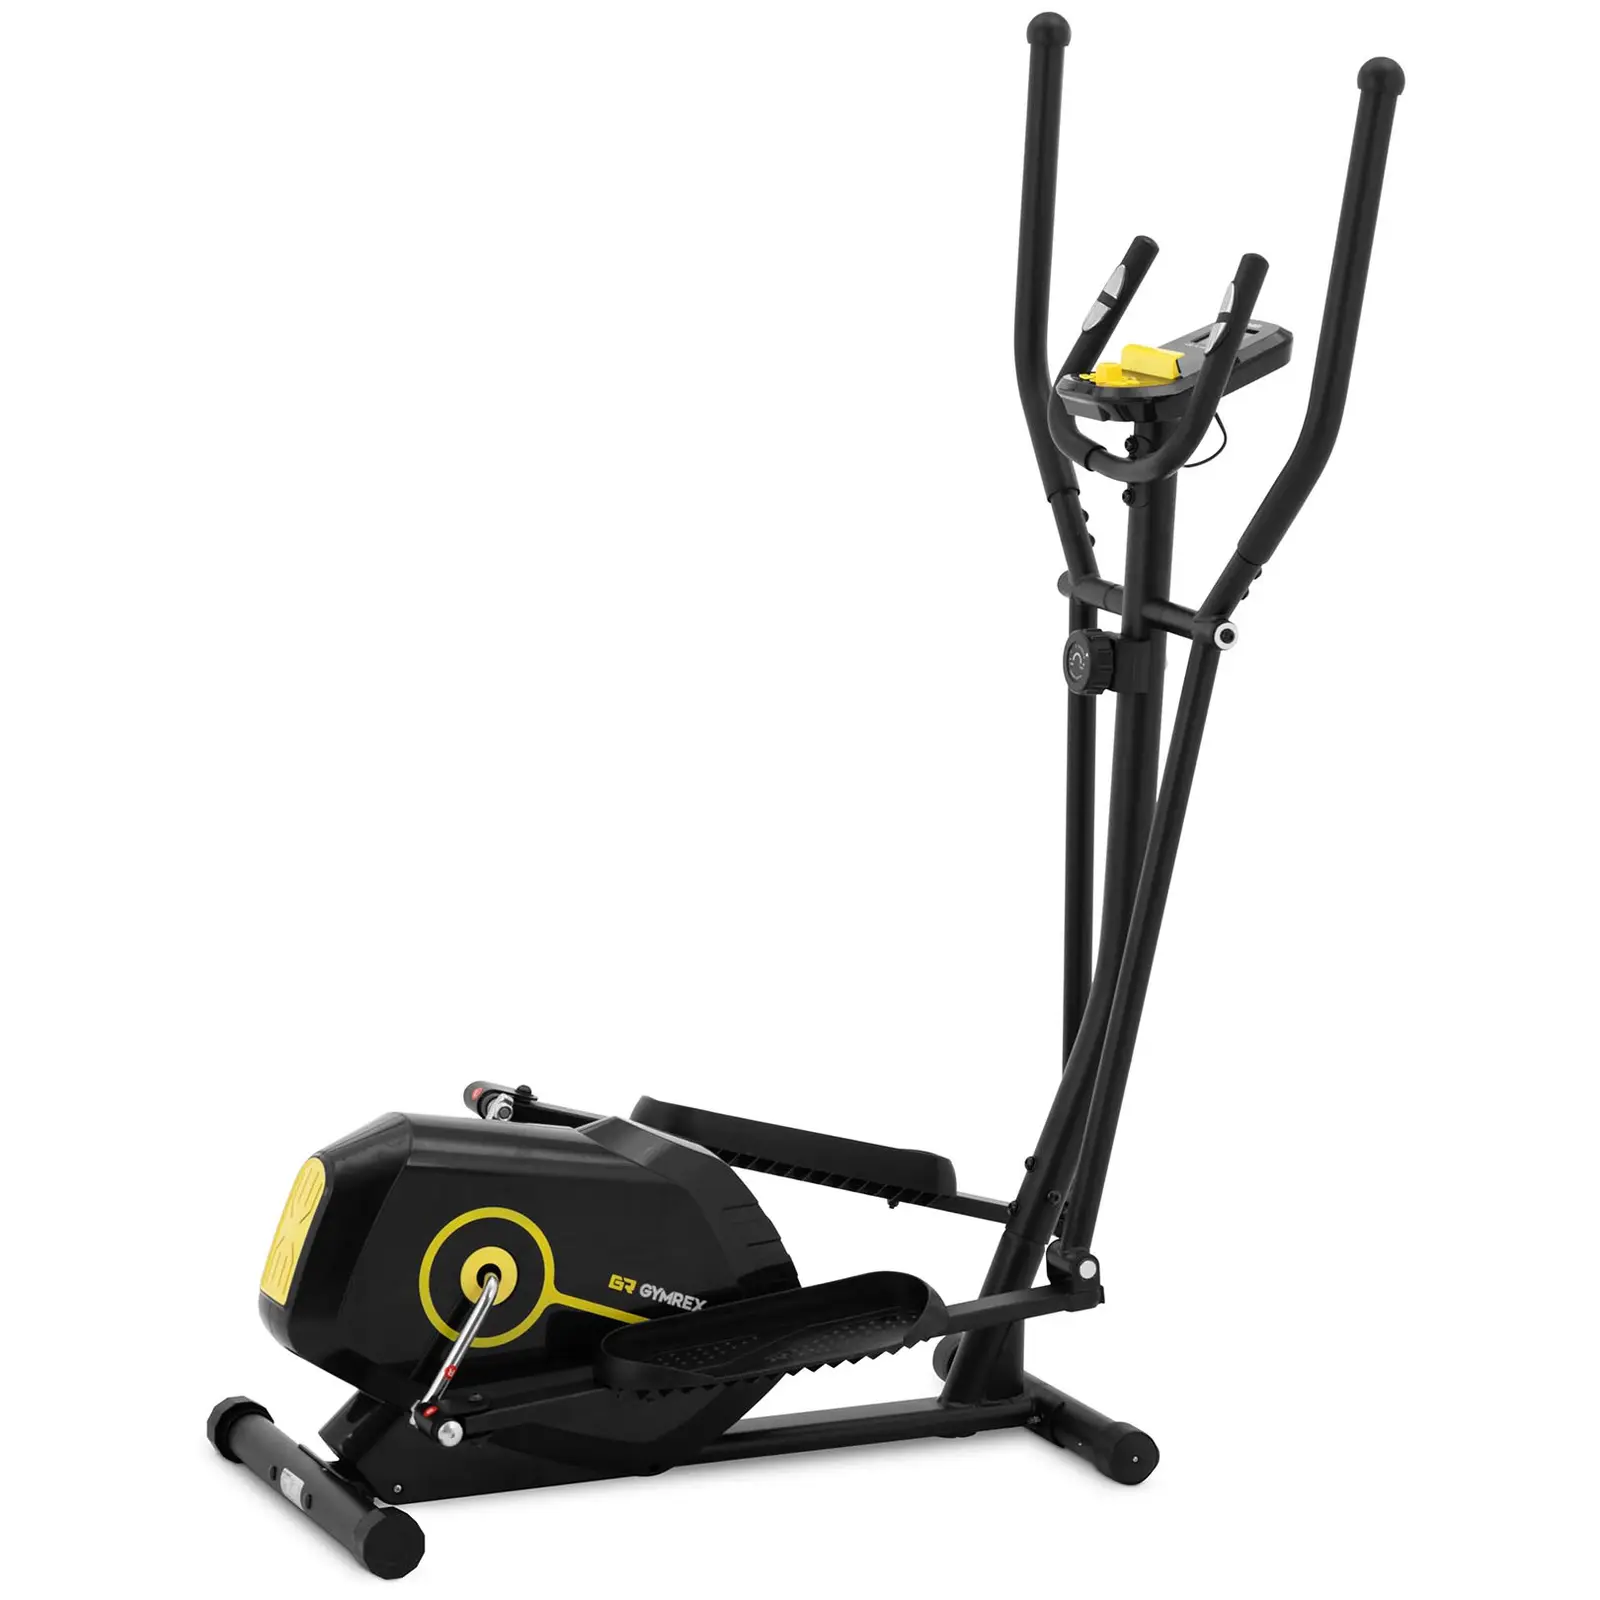 Crosstrainer - up to 110 kg - LCD - iPad holder